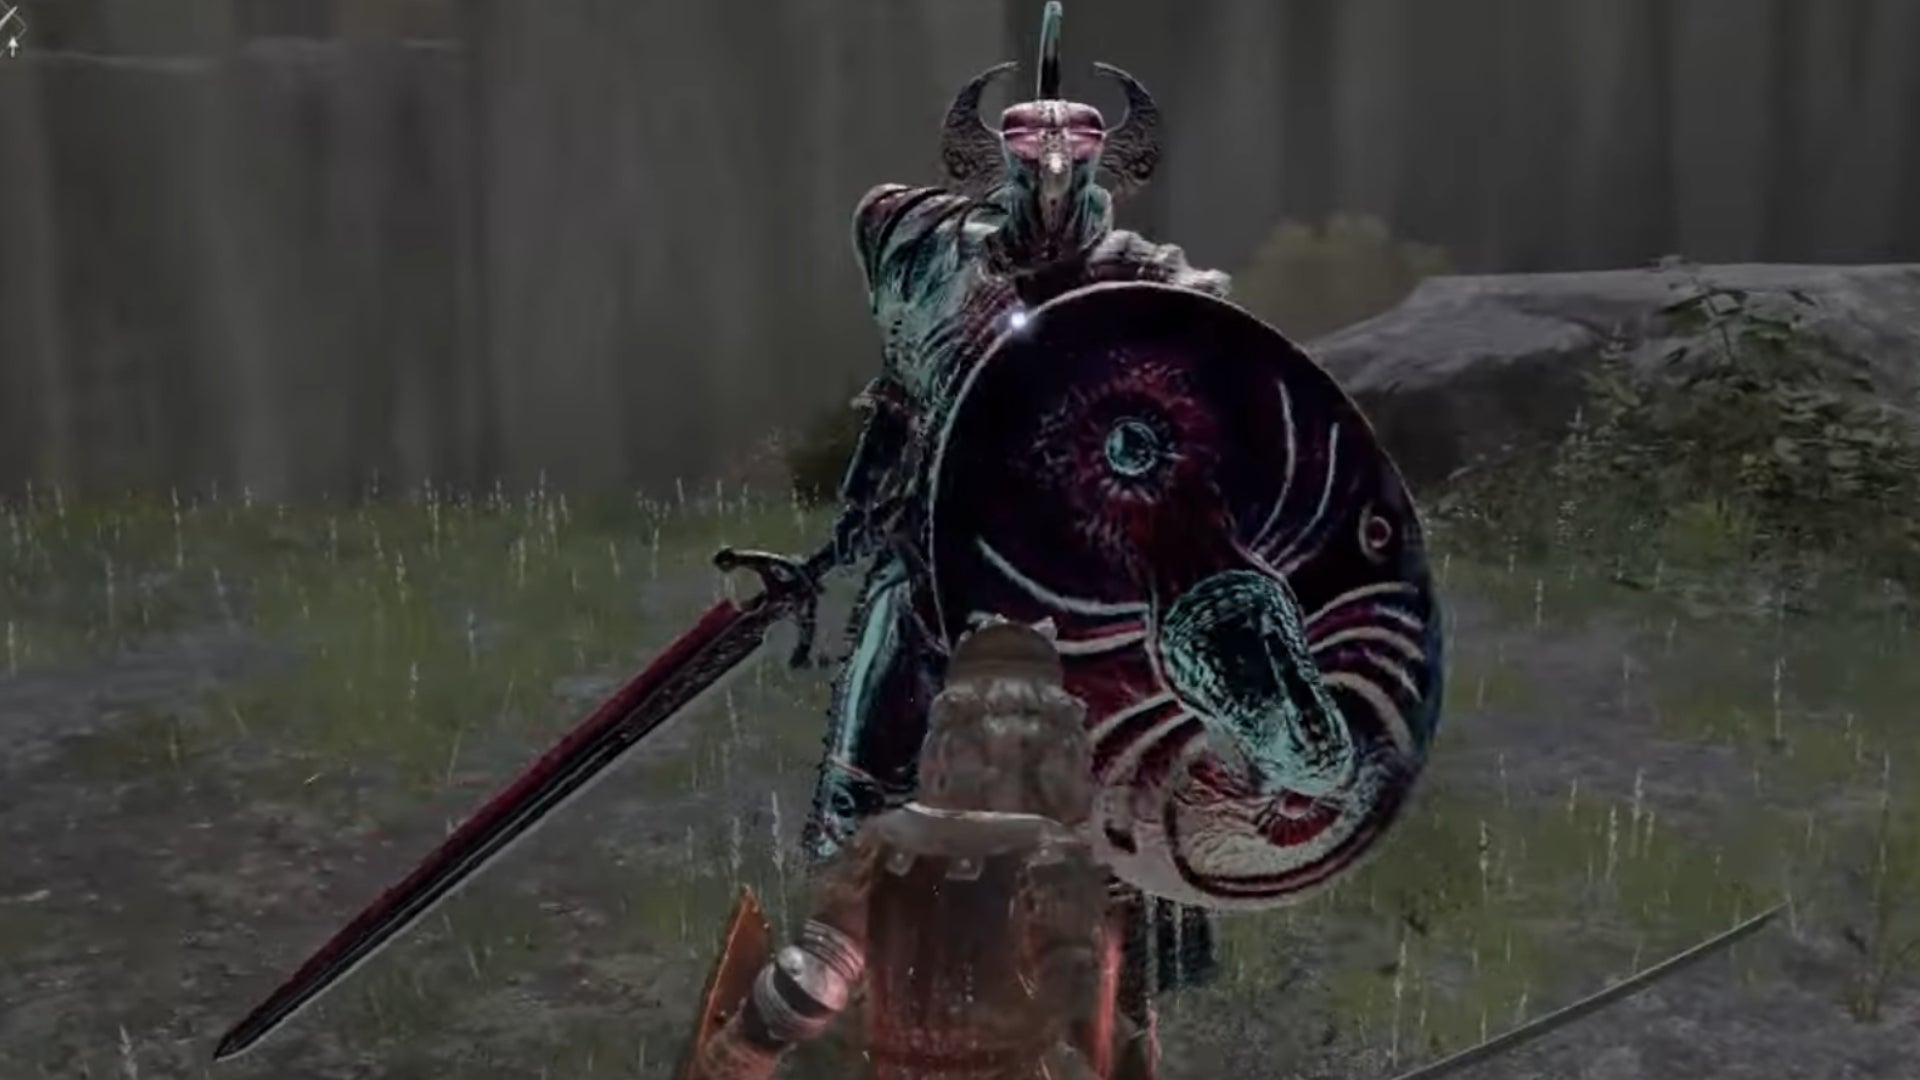 The Crucible Knight, a boss in Elden Ring, bears down upon the player holding its greatsword and shield.